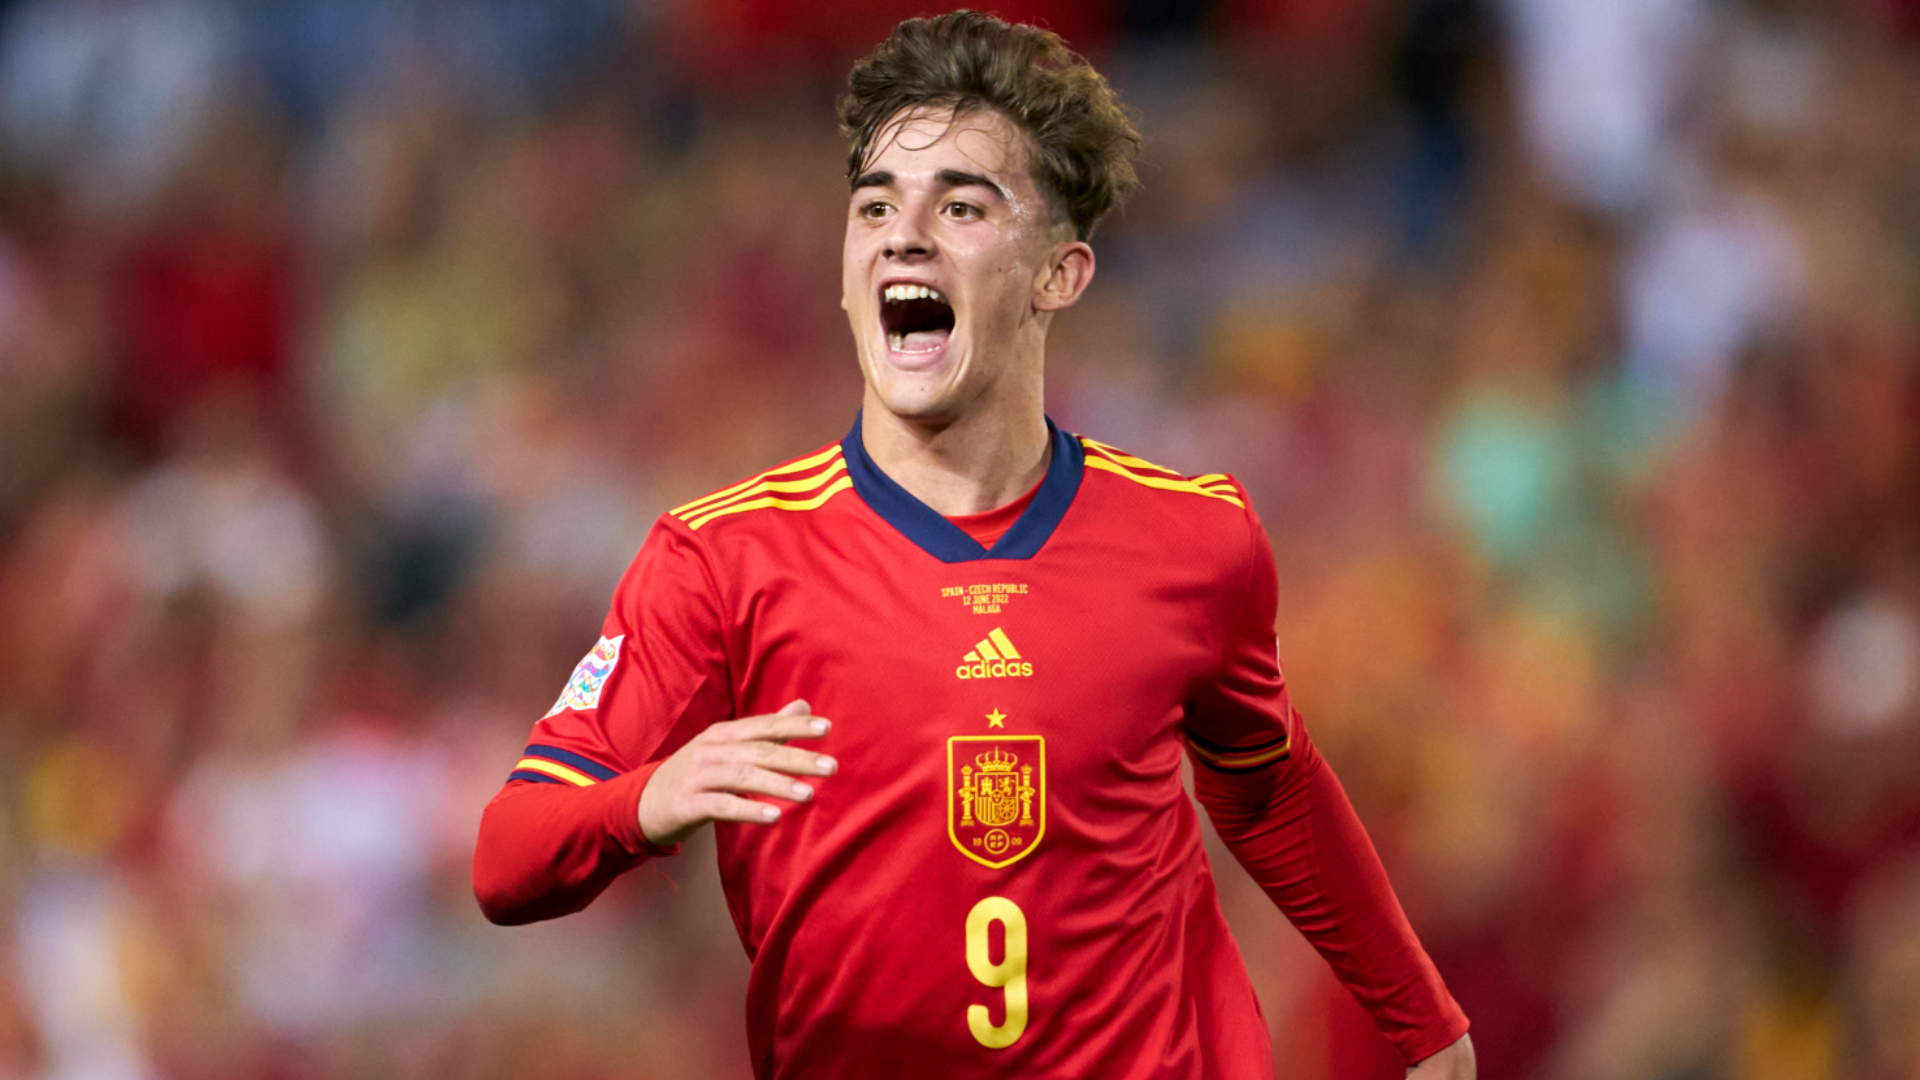 Young stars fire Spain past Jordan in WC warm-up